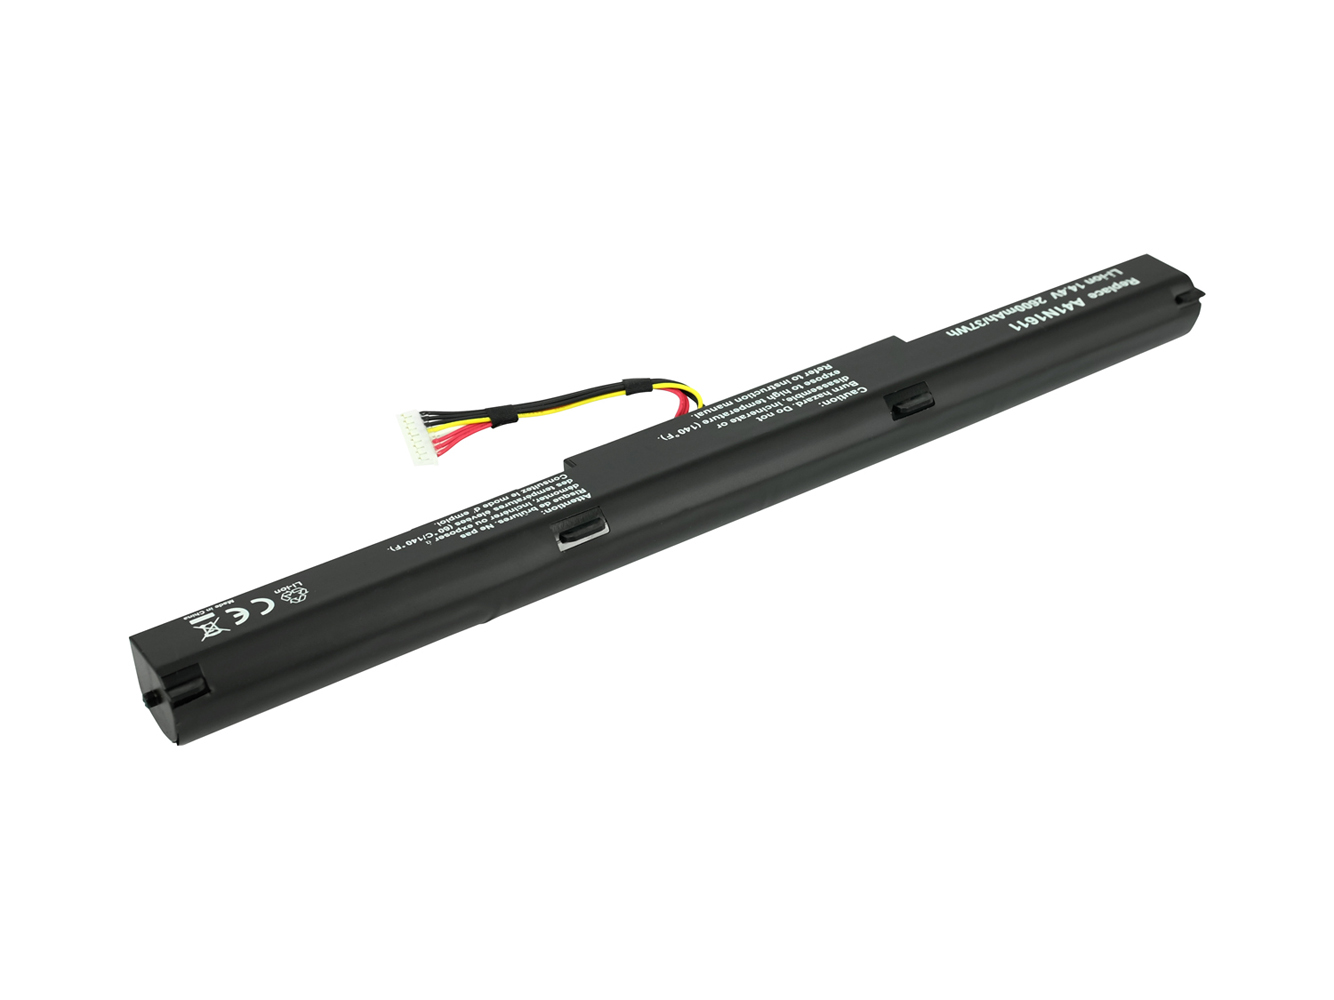 0B110-00470000, A41LP4Q replacement Laptop Battery for Asus GL553VD, GL553VE, 2600mAh, 14.40V